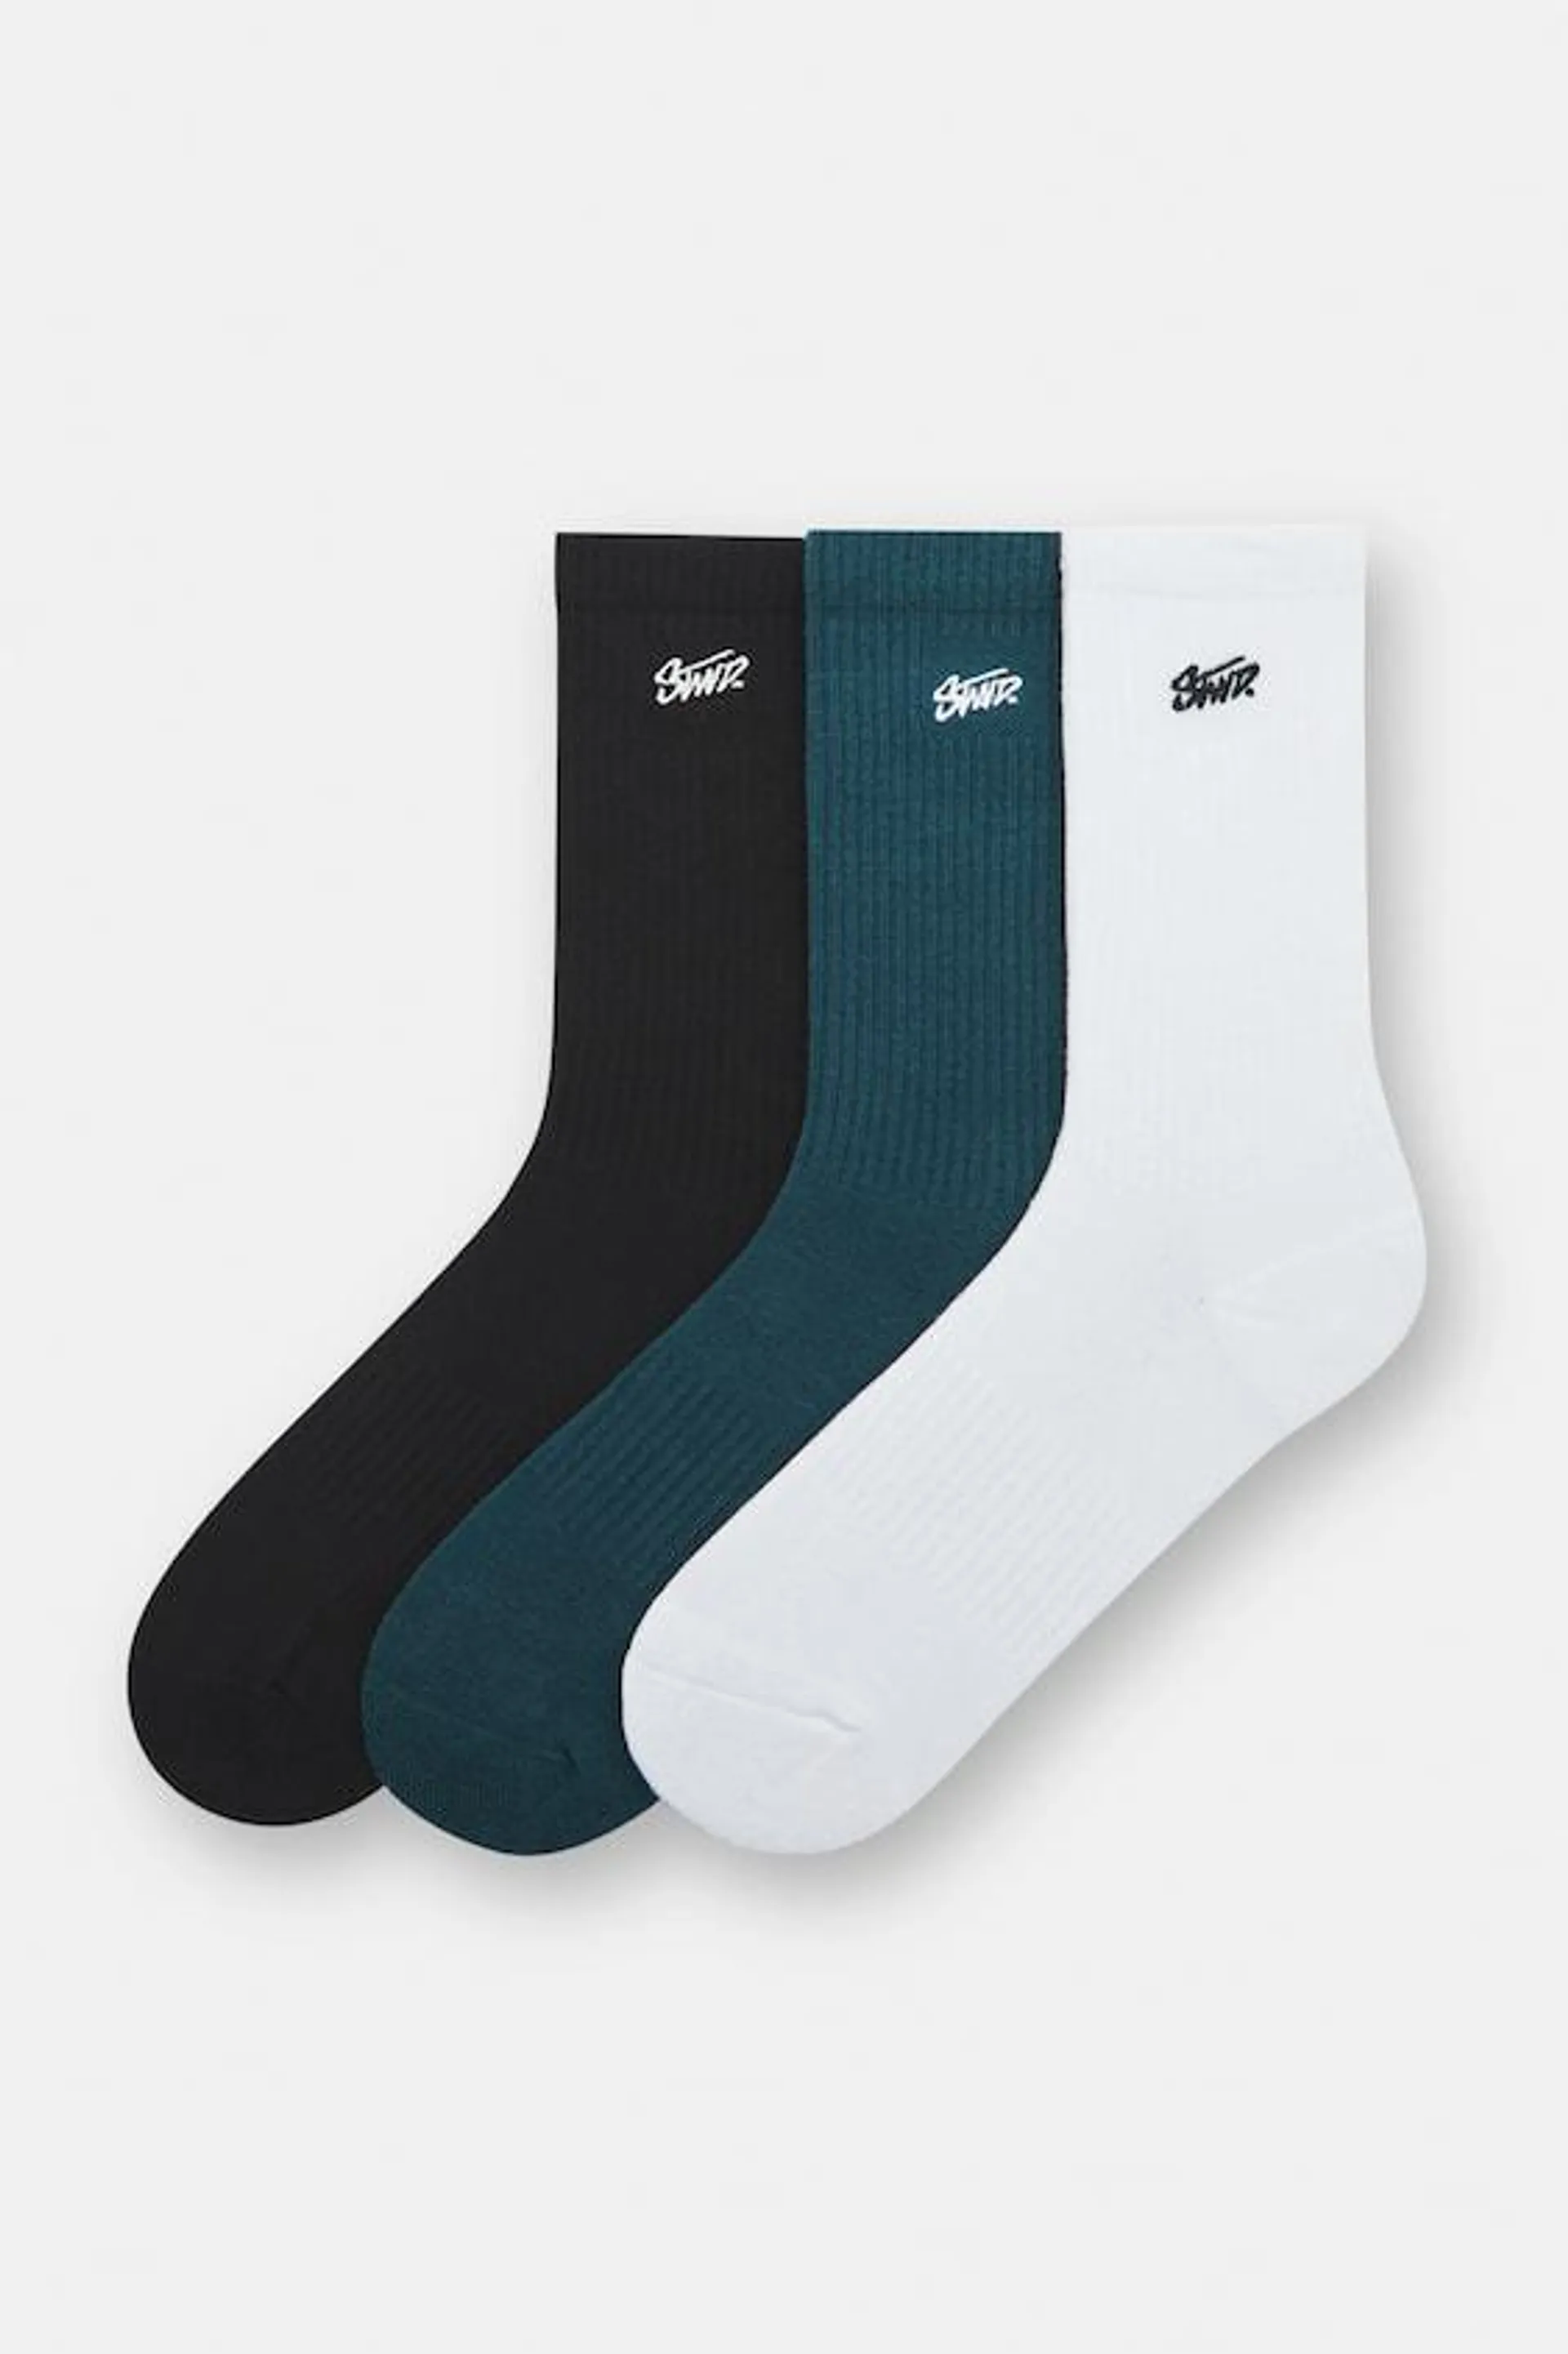 PACK OF 3 PAIRS OF EMBROIDERED SOCKS